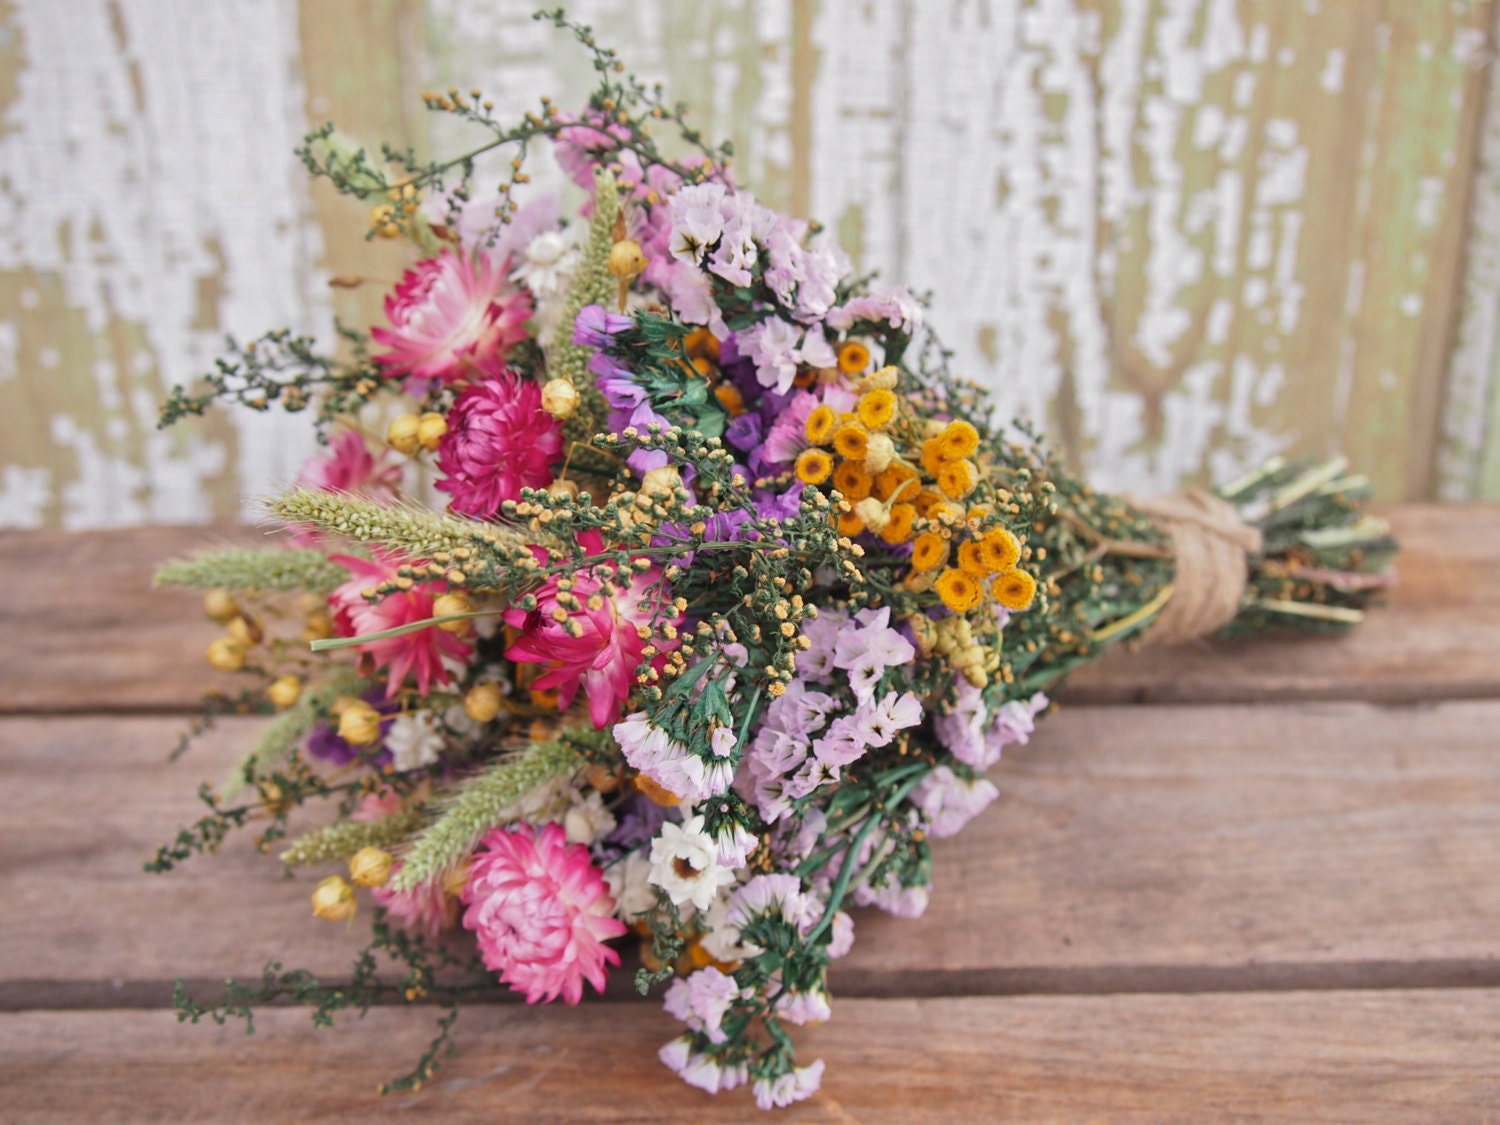 Our FIELD FLOWER Bridesmaid Dried Flower Bouquet - For a Rustic Country Wedding